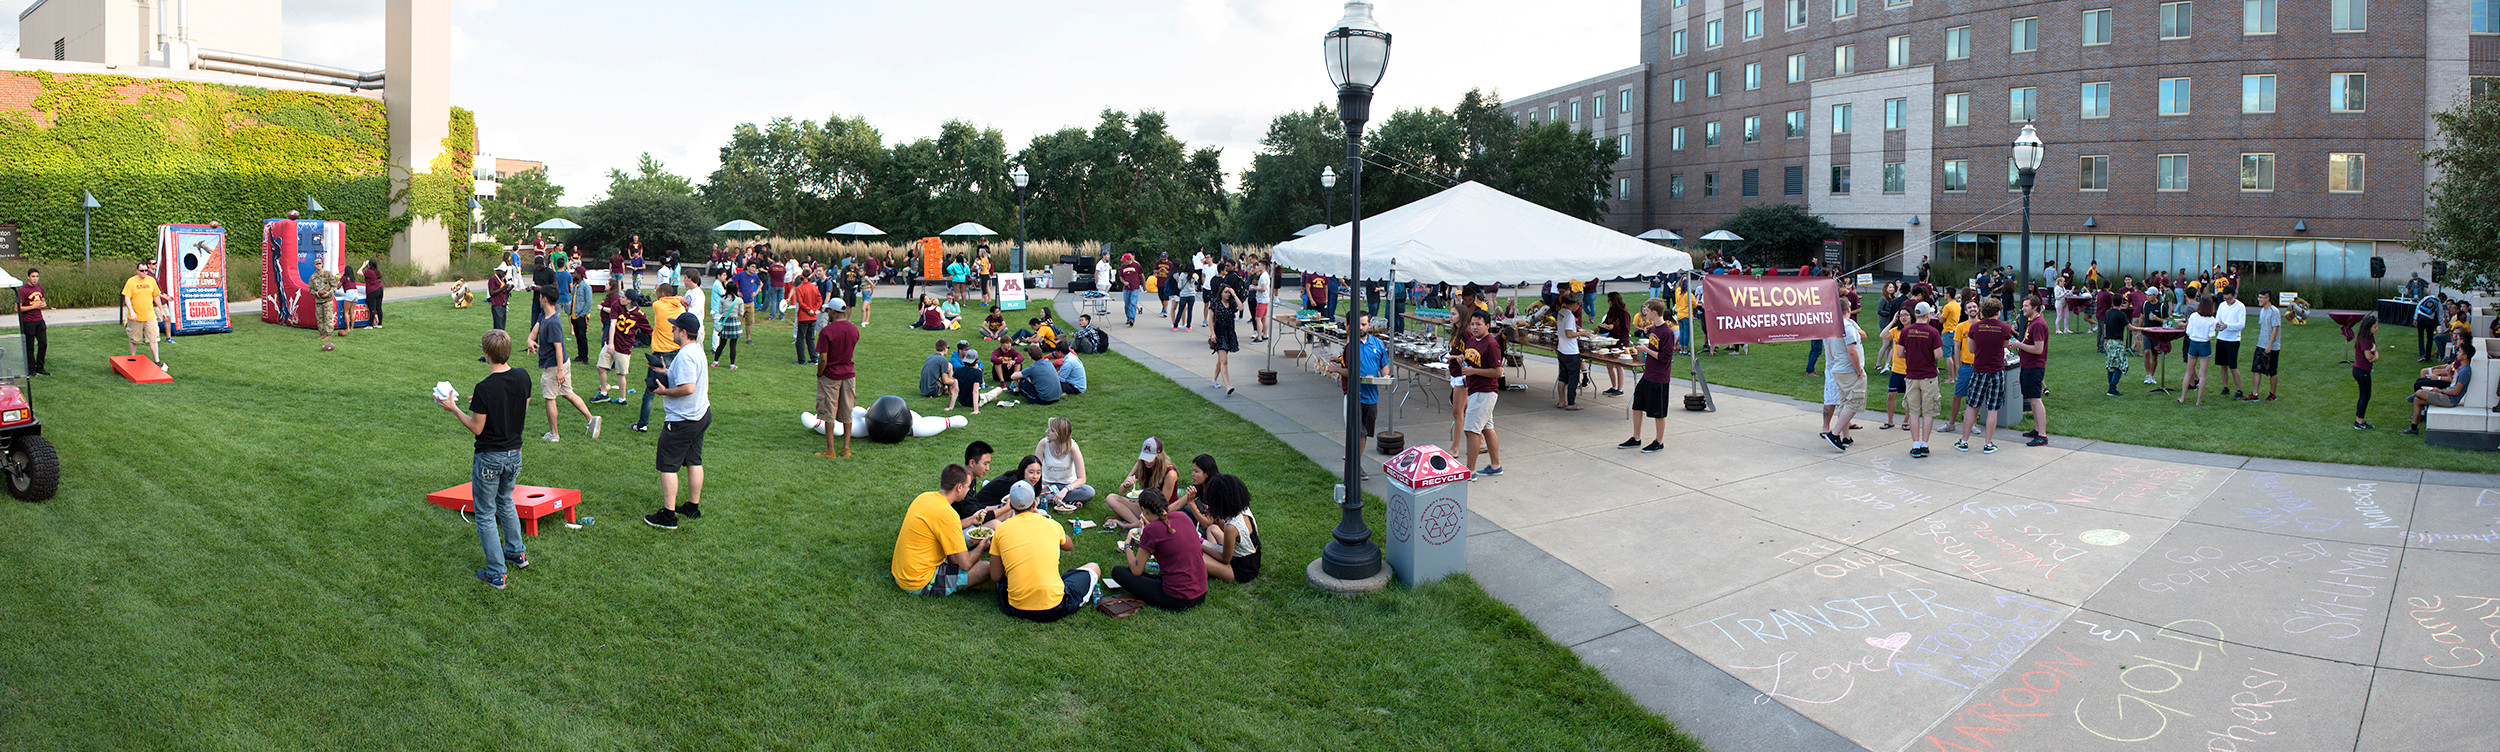 Students gather outdoors for the Incoming Transfer Student welcome picnic